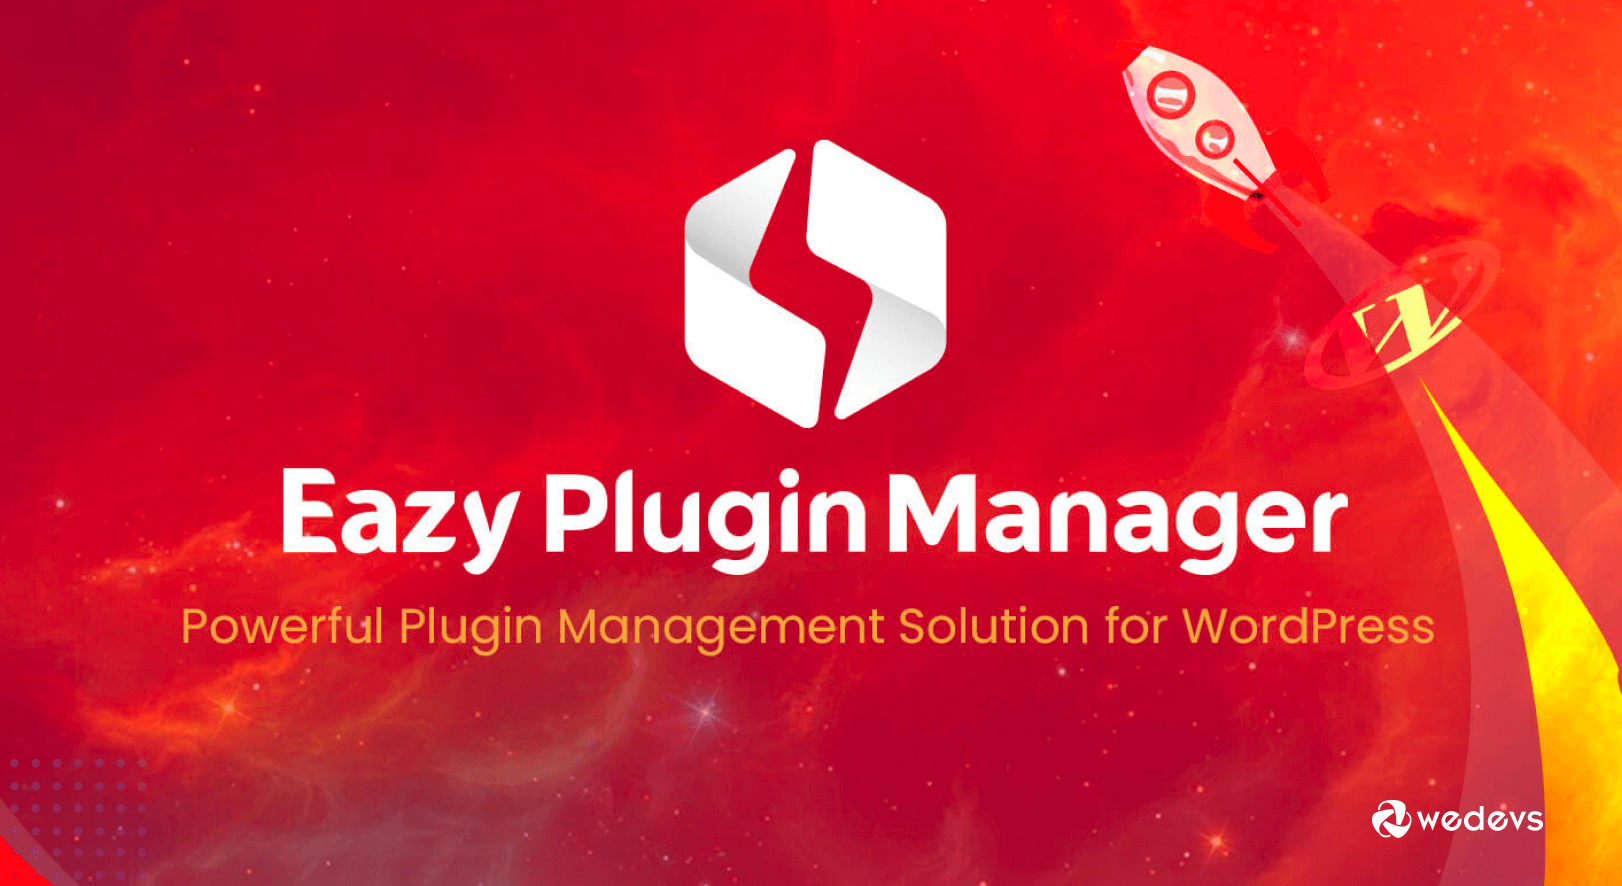 Introducing Eazy Plugin Manager: The Easy Way to Manage WordPress Plugins for Admins and Developers